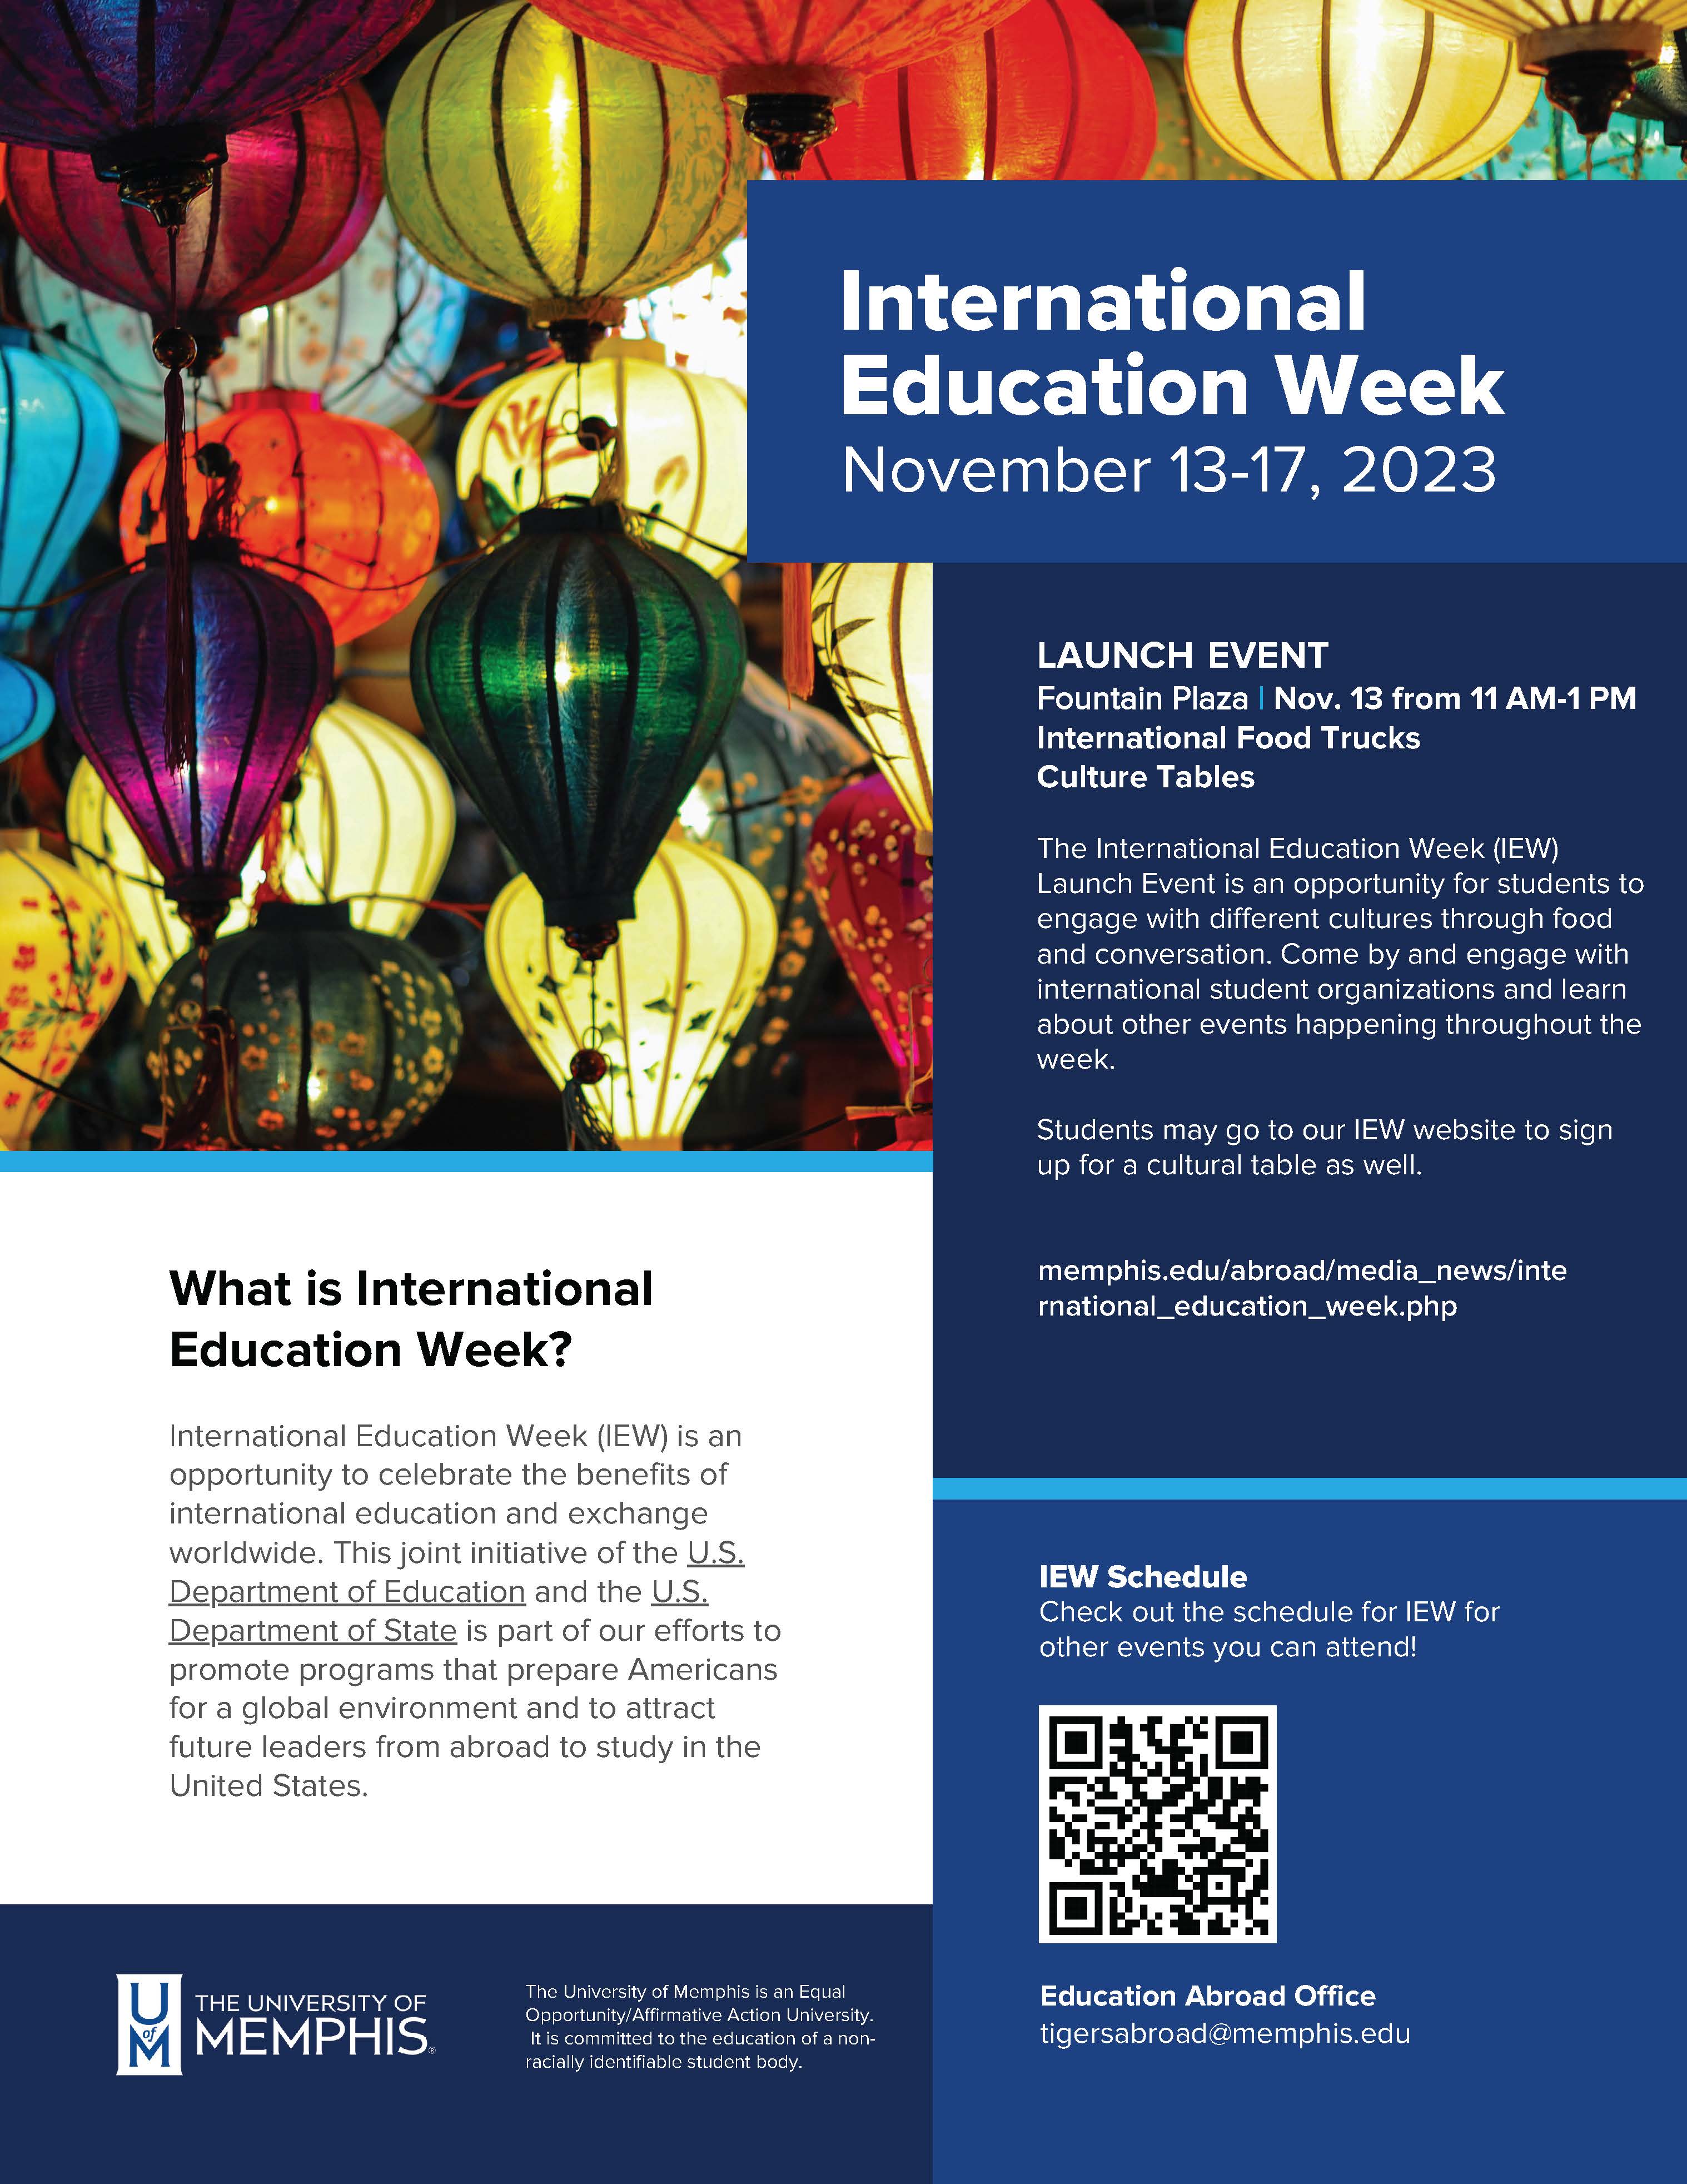 The image is a poster promoting International Education Week at The University of Memphis, scheduled for November 13-17, 2024. The background features an array of colorful lanterns, suggesting a multicultural theme.  At the top, the text reads "International Education Week, November 13-17, 2023" in large, white font on a blue background.  The middle section details the "LAUNCH EVENT" at Fountain Plaza on November 13 from 11 AM-1 PM, which will include International Food Trucks and Culture Tables. The description explains that the launch event offers an opportunity for students to engage with different cultures through food and conversation and invites them to learn about other events happening throughout the week.  The left side of the poster answers "What is International Education Week?" explaining that it's a celebration of the benefits of international education and exchange worldwide, a joint initiative of the U.S. Department of Education and the U.S. Department of State aimed at promoting programs that prepare Americans for a global environment and attracting future leaders from abroad to study in the United States.  There is a section titled "IEW Schedule" with a prompt to check out the schedule for IEW for other events attendees can go to, accompanied by a QR code.  On the bottom, the "Education Abroad Office" email address is listed as tigersabroad@memphis.edu.  Finally, the poster includes the logo of The University of Memphis and a statement indicating that the university is an Equal Opportunity/Affirmative Action University, committed to the education of a non-racially identifiable student body.  The website link for more information is provided as memphis.edu/abroad/media_news/international_education_week.php.